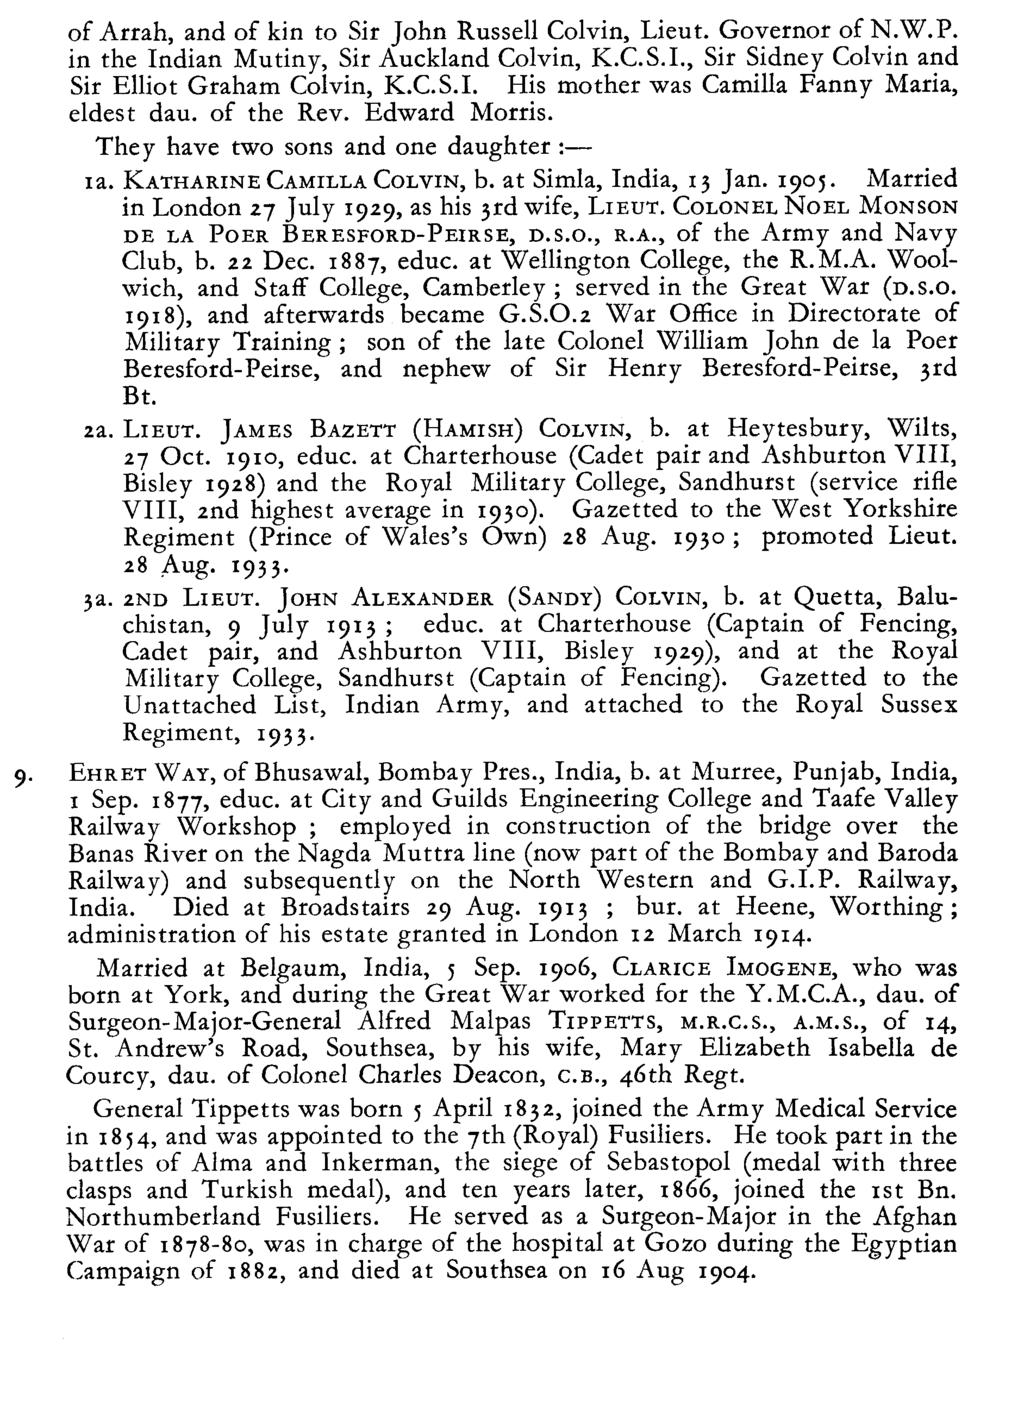 of Arrah, and of kin to Sir John Russell Colvin, Lieut. Governor of N.W.P. in the ndian Mutiny, Sir Auckland Colvin, K.C.S.., Sir Sidney Colvin and Sir Elliot Graham Colvin, K.C.S.. His mother was Camilla Fanny Maria, eldest dau.